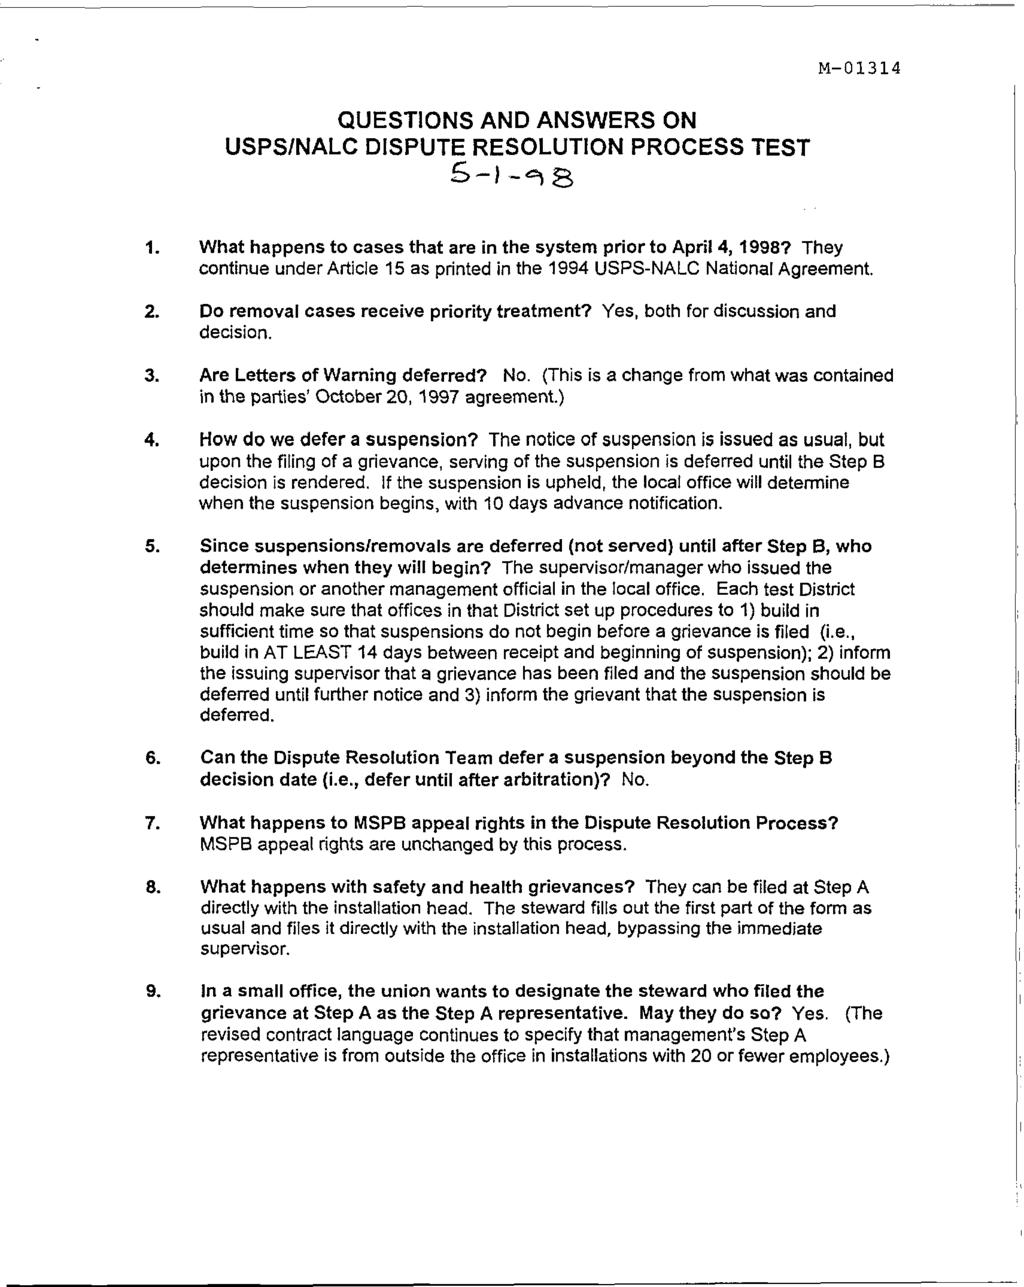 QUESTIONS AND ANSWERS ON USPS/NALC DISPUTE RESOLUTION PROCESS TEST.5-1- "'l 8 1. What happens to cases that are in the system prior to April 4, 1998?